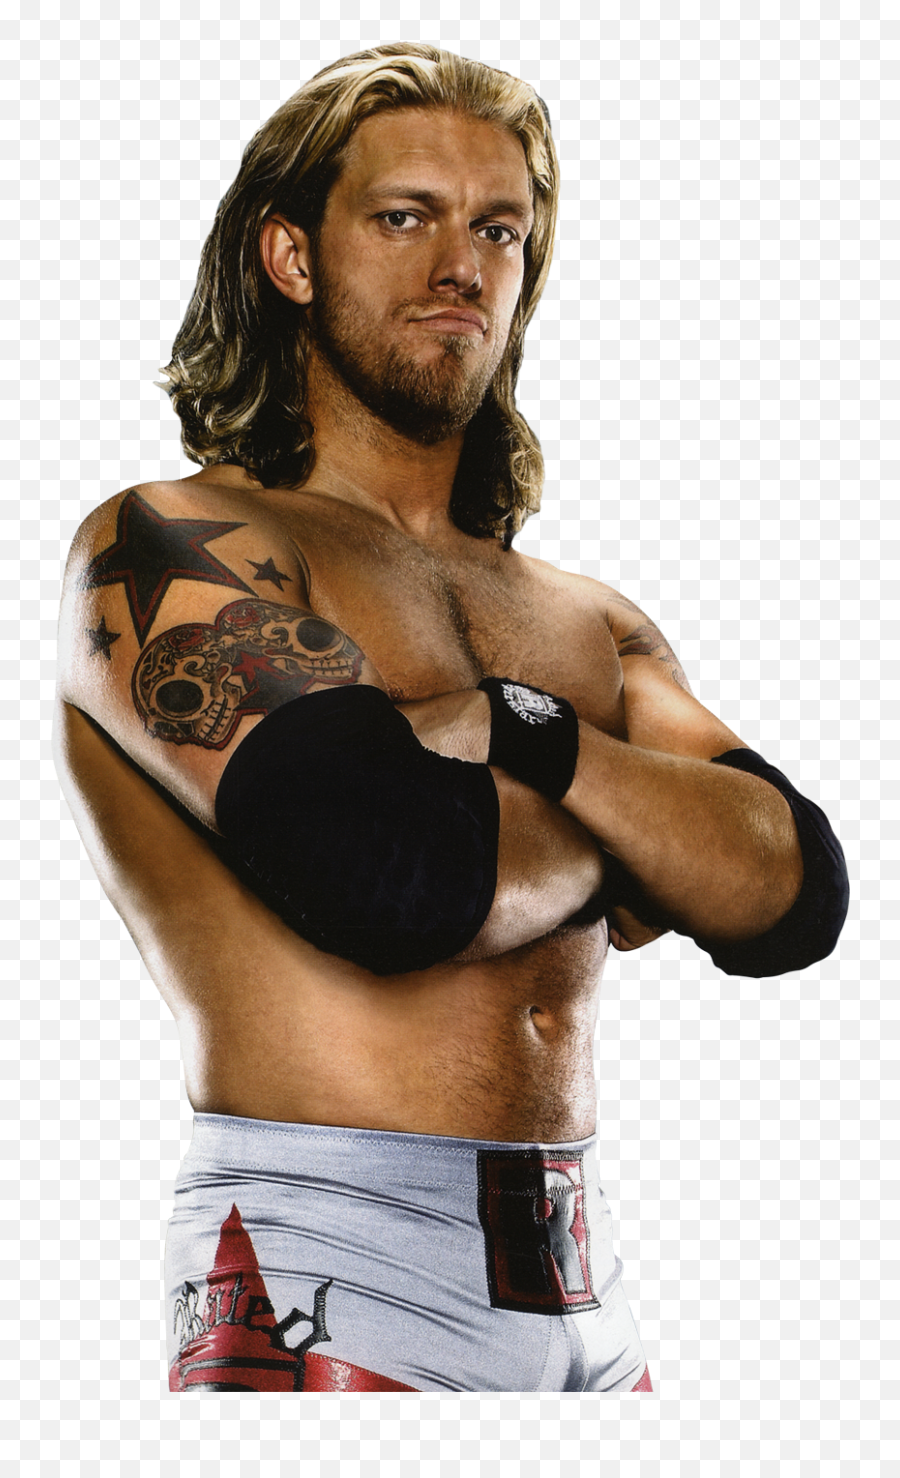 Transparent Png Images Icons And Clip Arts - Wwe Wrestlemania Xxiv,Edge Png